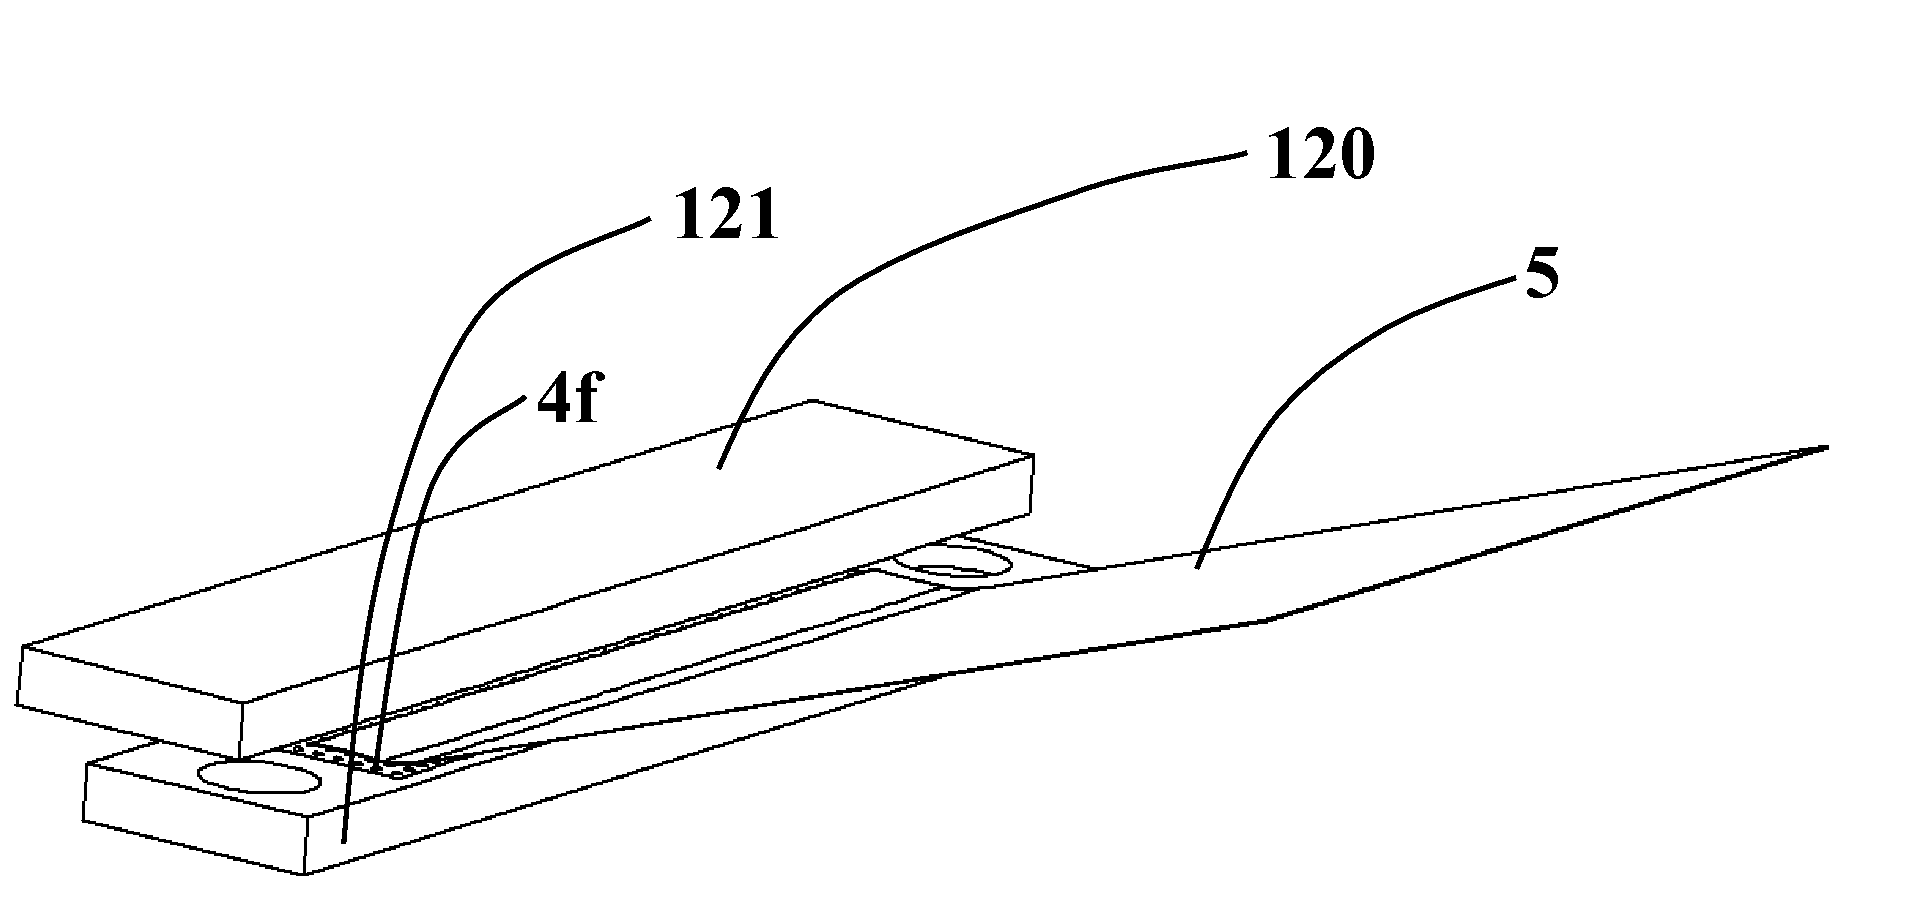 Apparatus and method for non-contact manipulation, conditioning, shaping and drying of surfaces